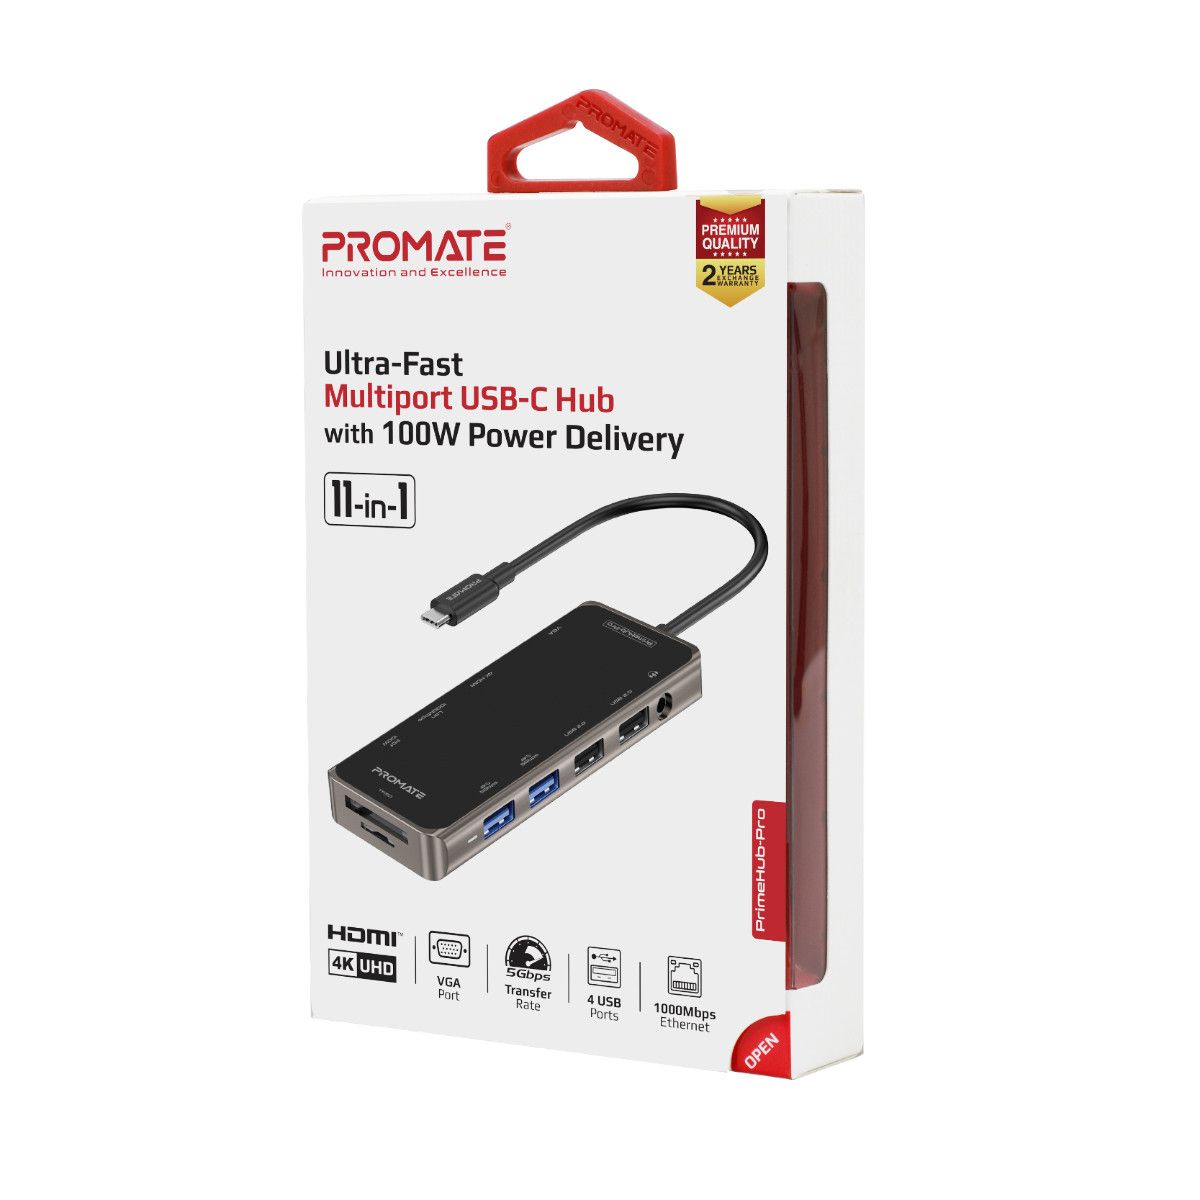 PROMATE 4-in-1 USB Multi-Port Hub with USB-C Connector.